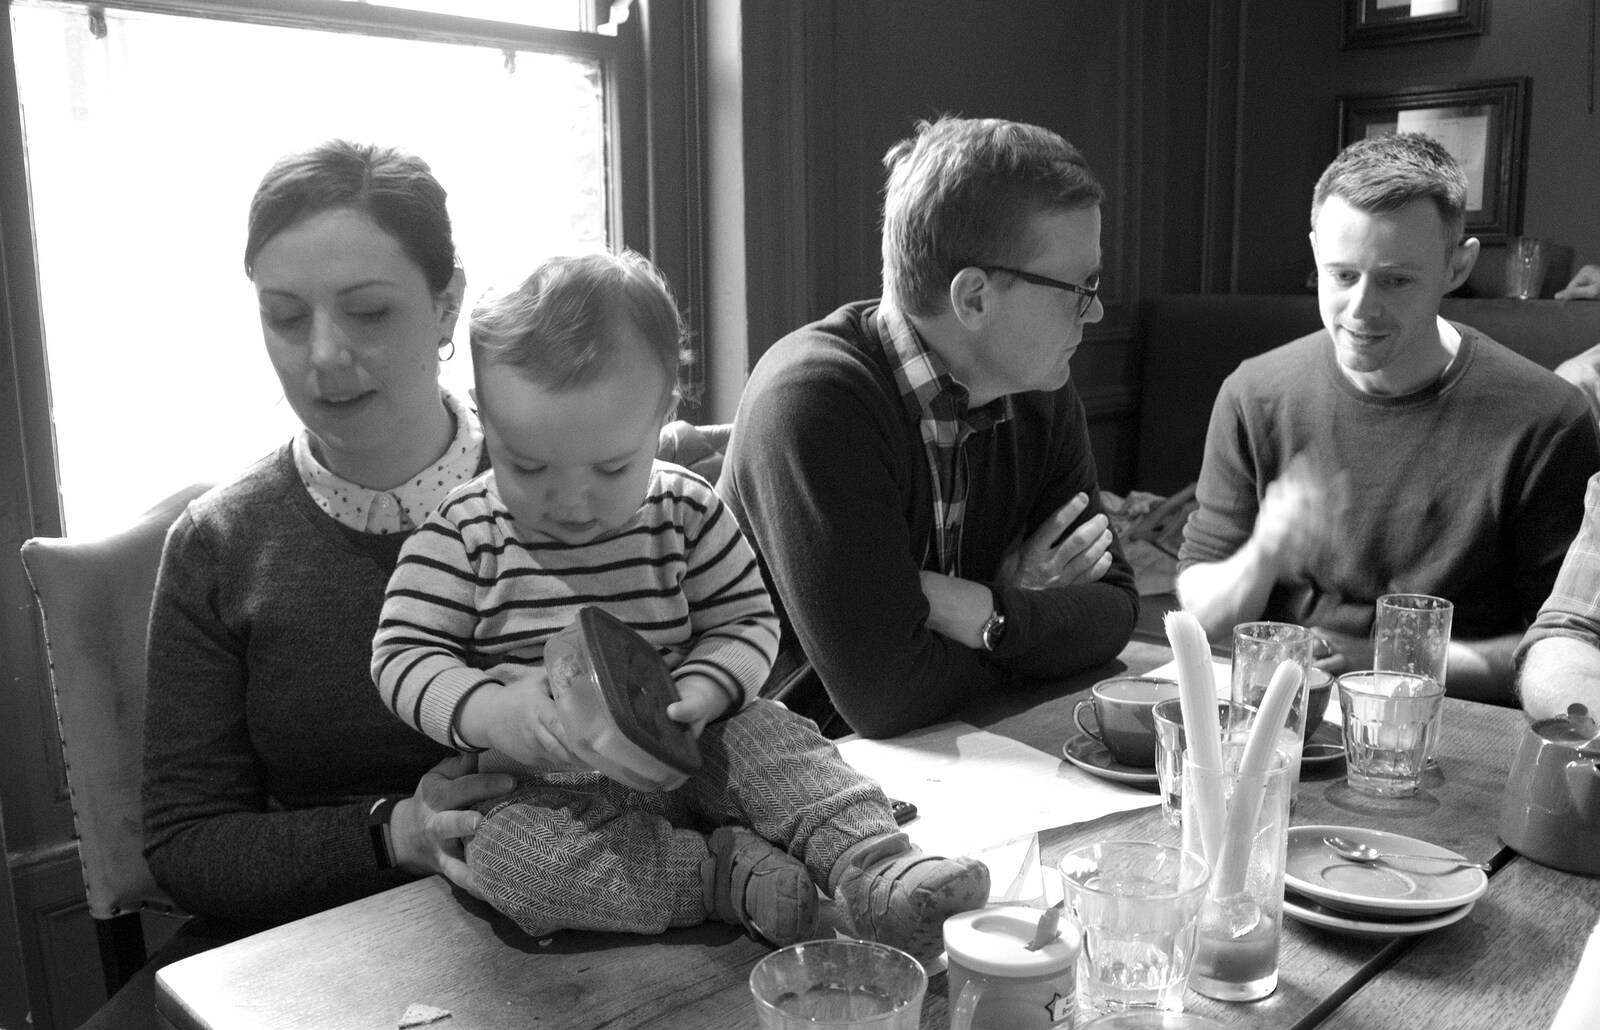 Ruth and her baby from The SwiftKey Reunion Brunch, Regent Street, Cambridge - 12th January 2019